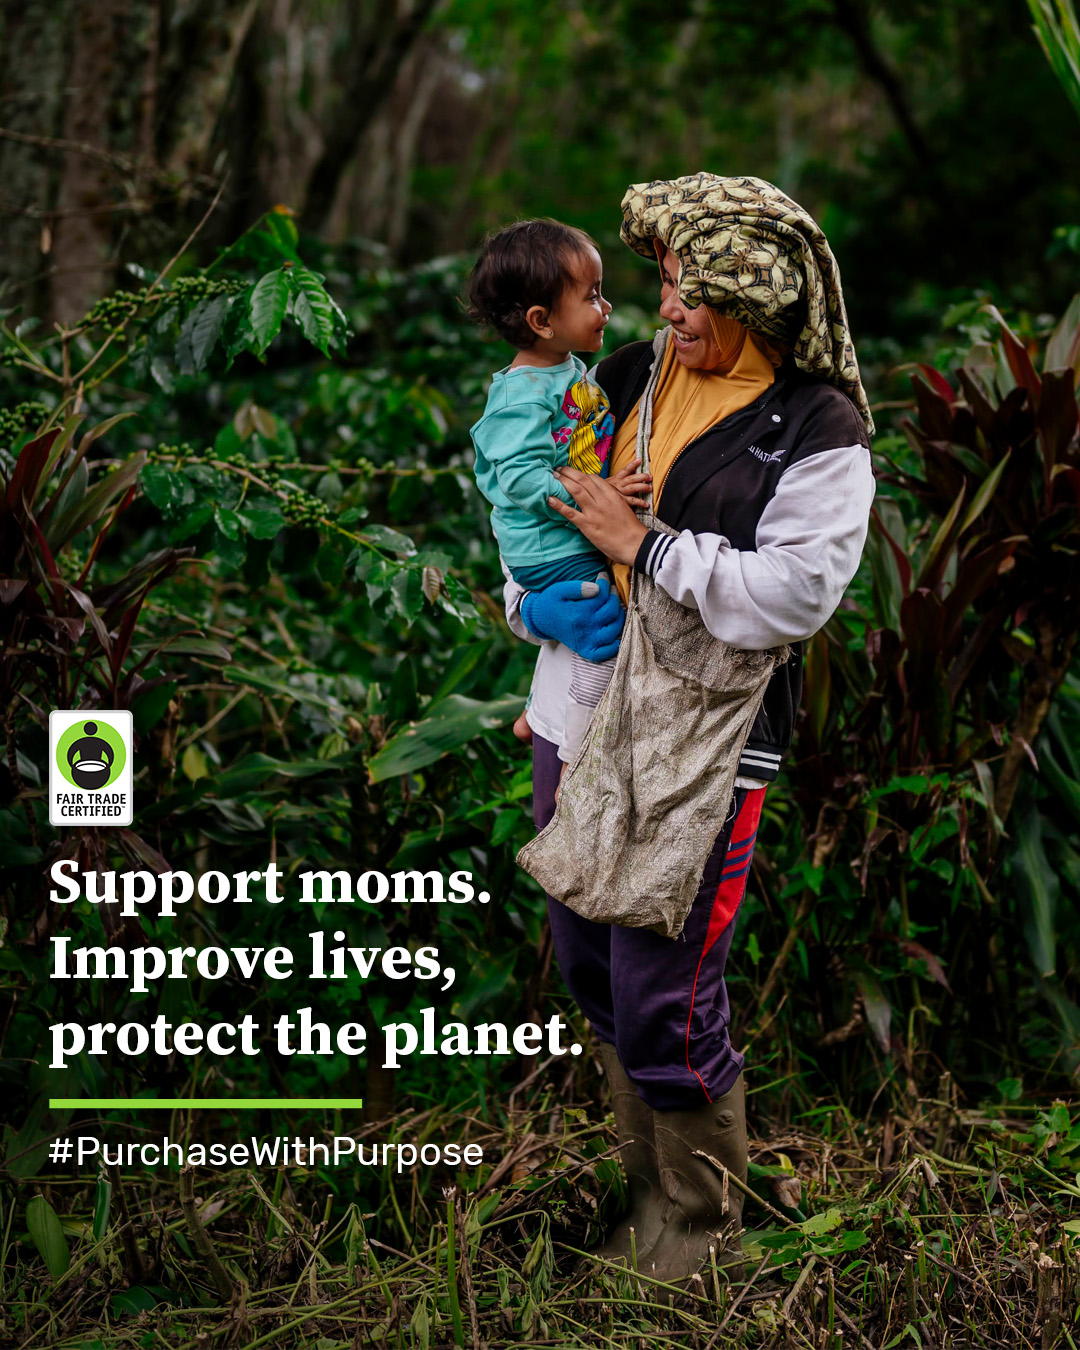 A Mother's Day graphic from Fair Trade Certified showing a mother holding and smiling at her baby. Text: "Support moms. Improve lives, protect the planet. #PurchaseWithPurpose"